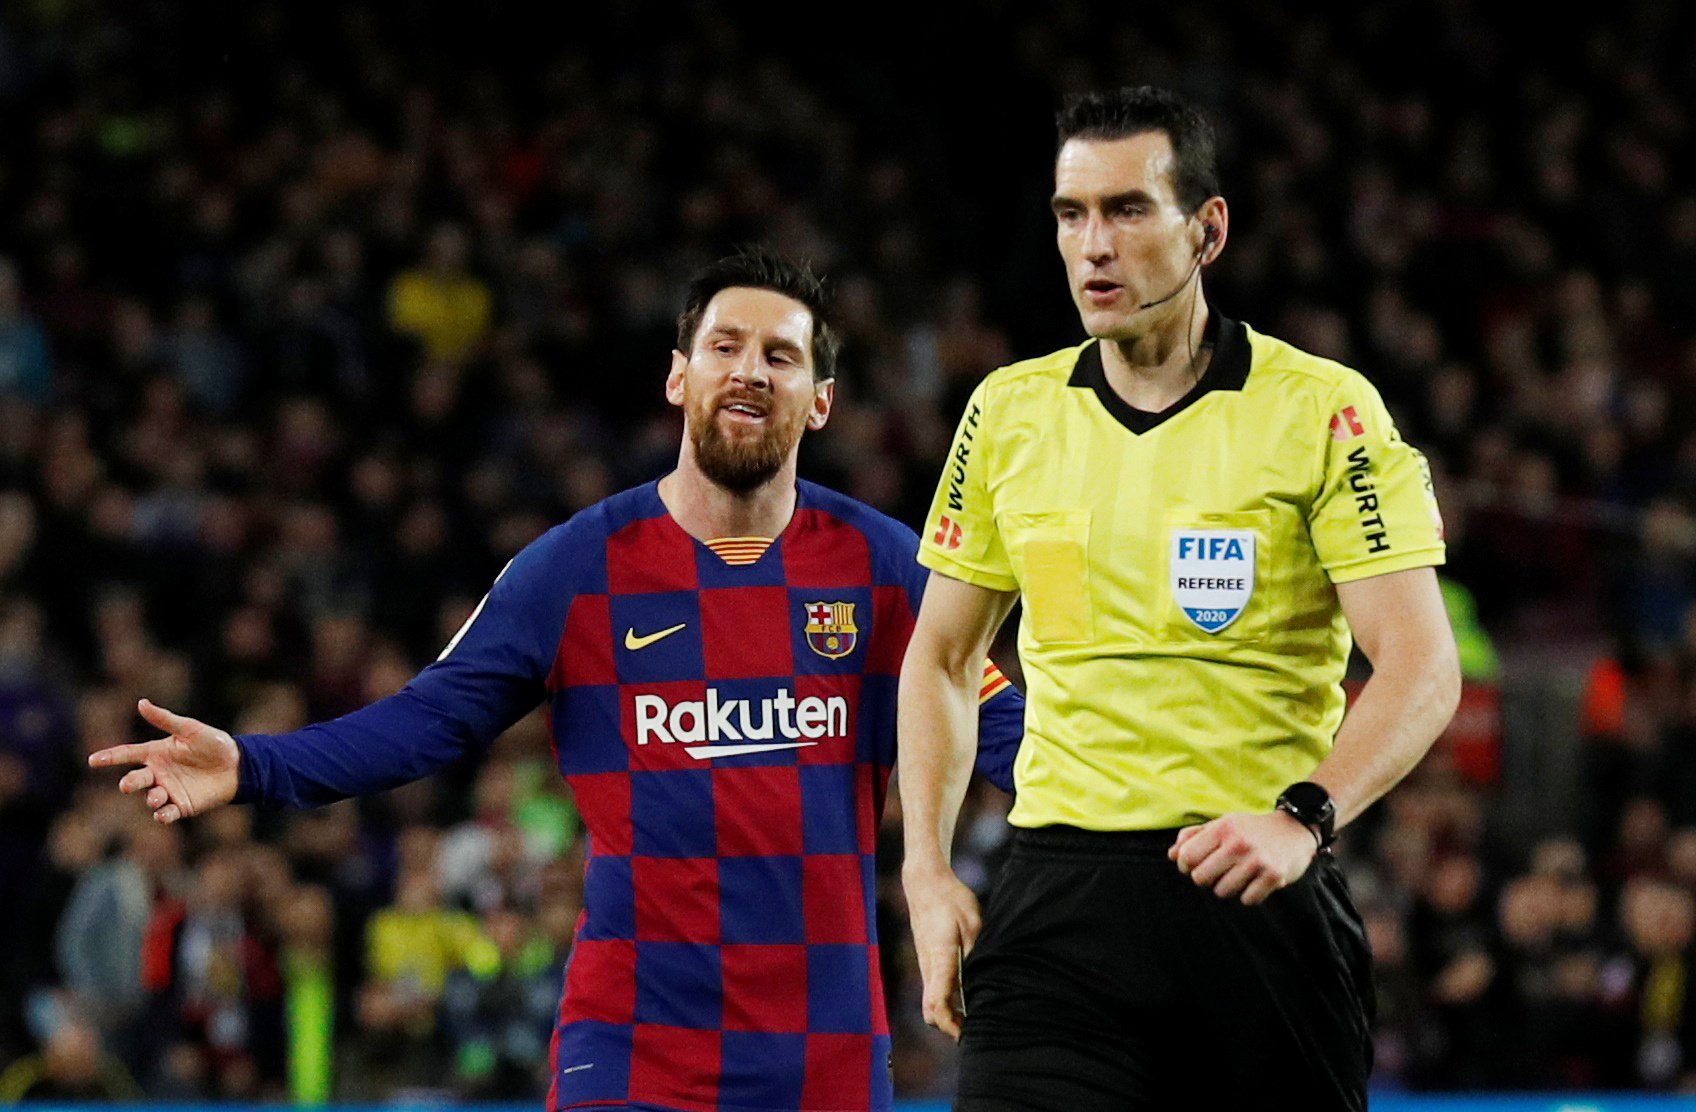 Soccer Football - La Liga Santander - FC Barcelona v Real Sociedad - Camp Nou, Barcelona, Spain - March 7, 2020  Barcelona's Lionel Messi reacts after being shown a yellow card by referee Juan Martinez Munuera  REUTERS/Albert Gea